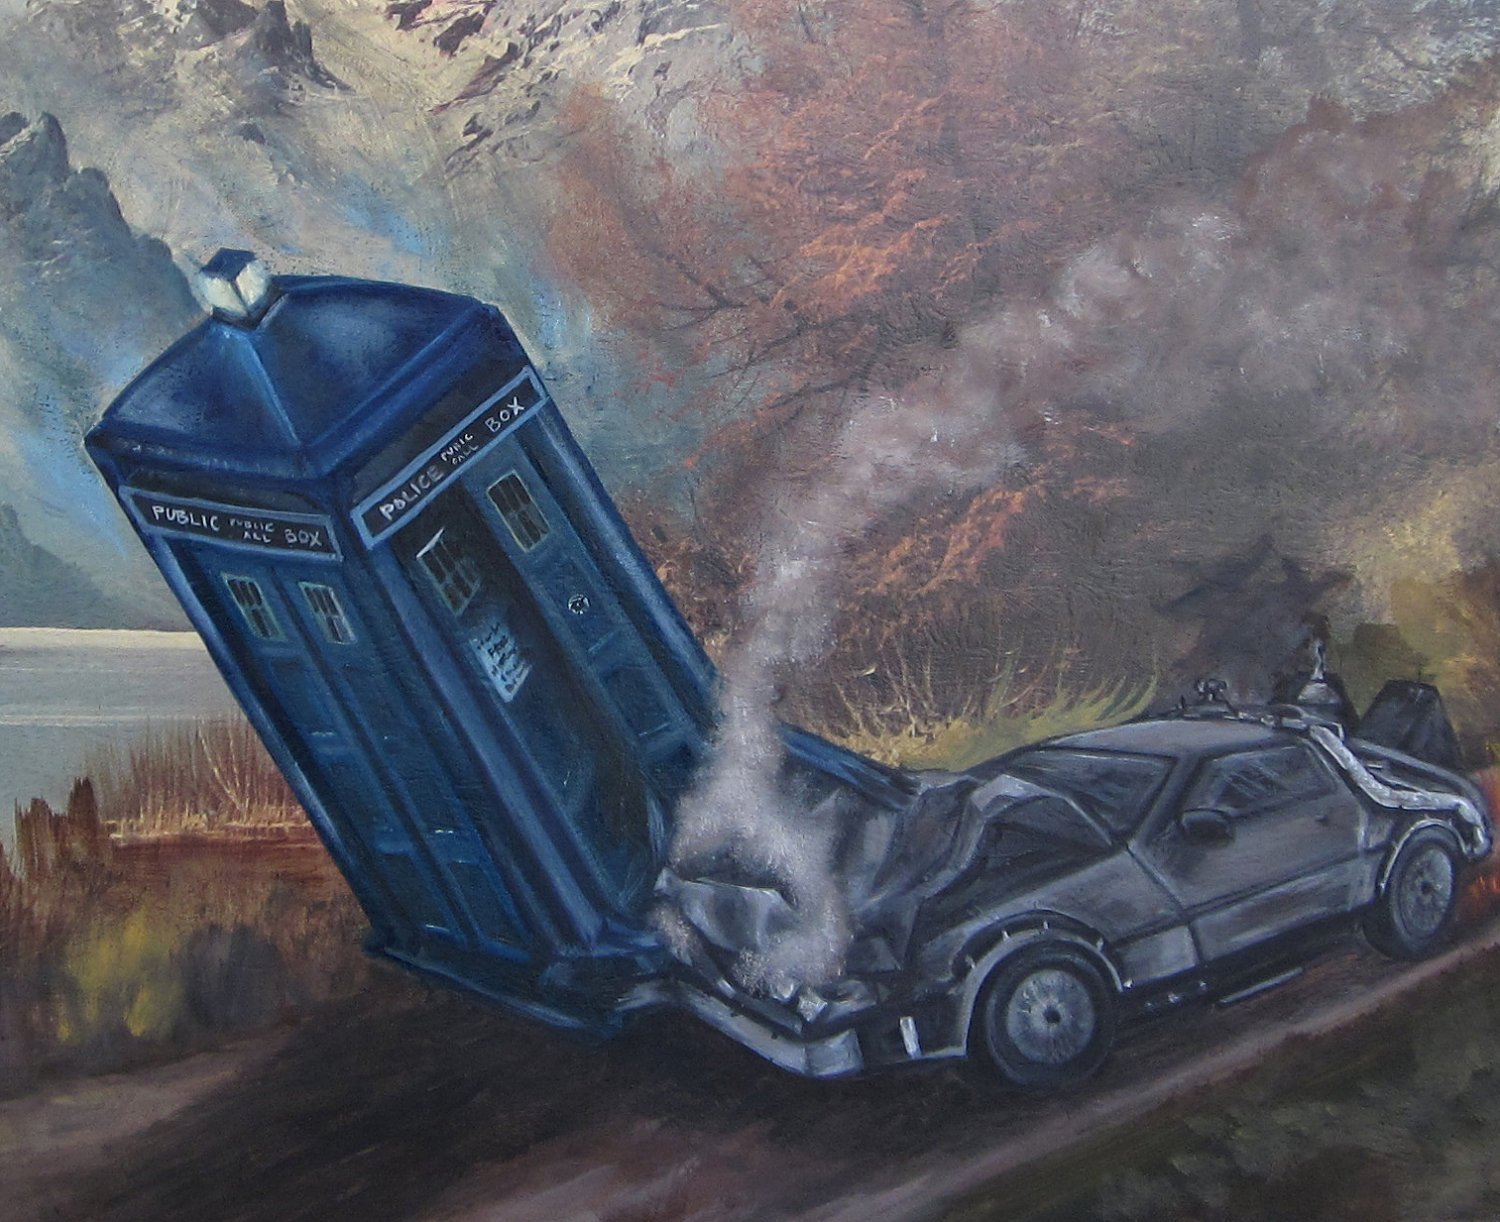 “Bad Timing” and Other Awesome Art by Kat Martin